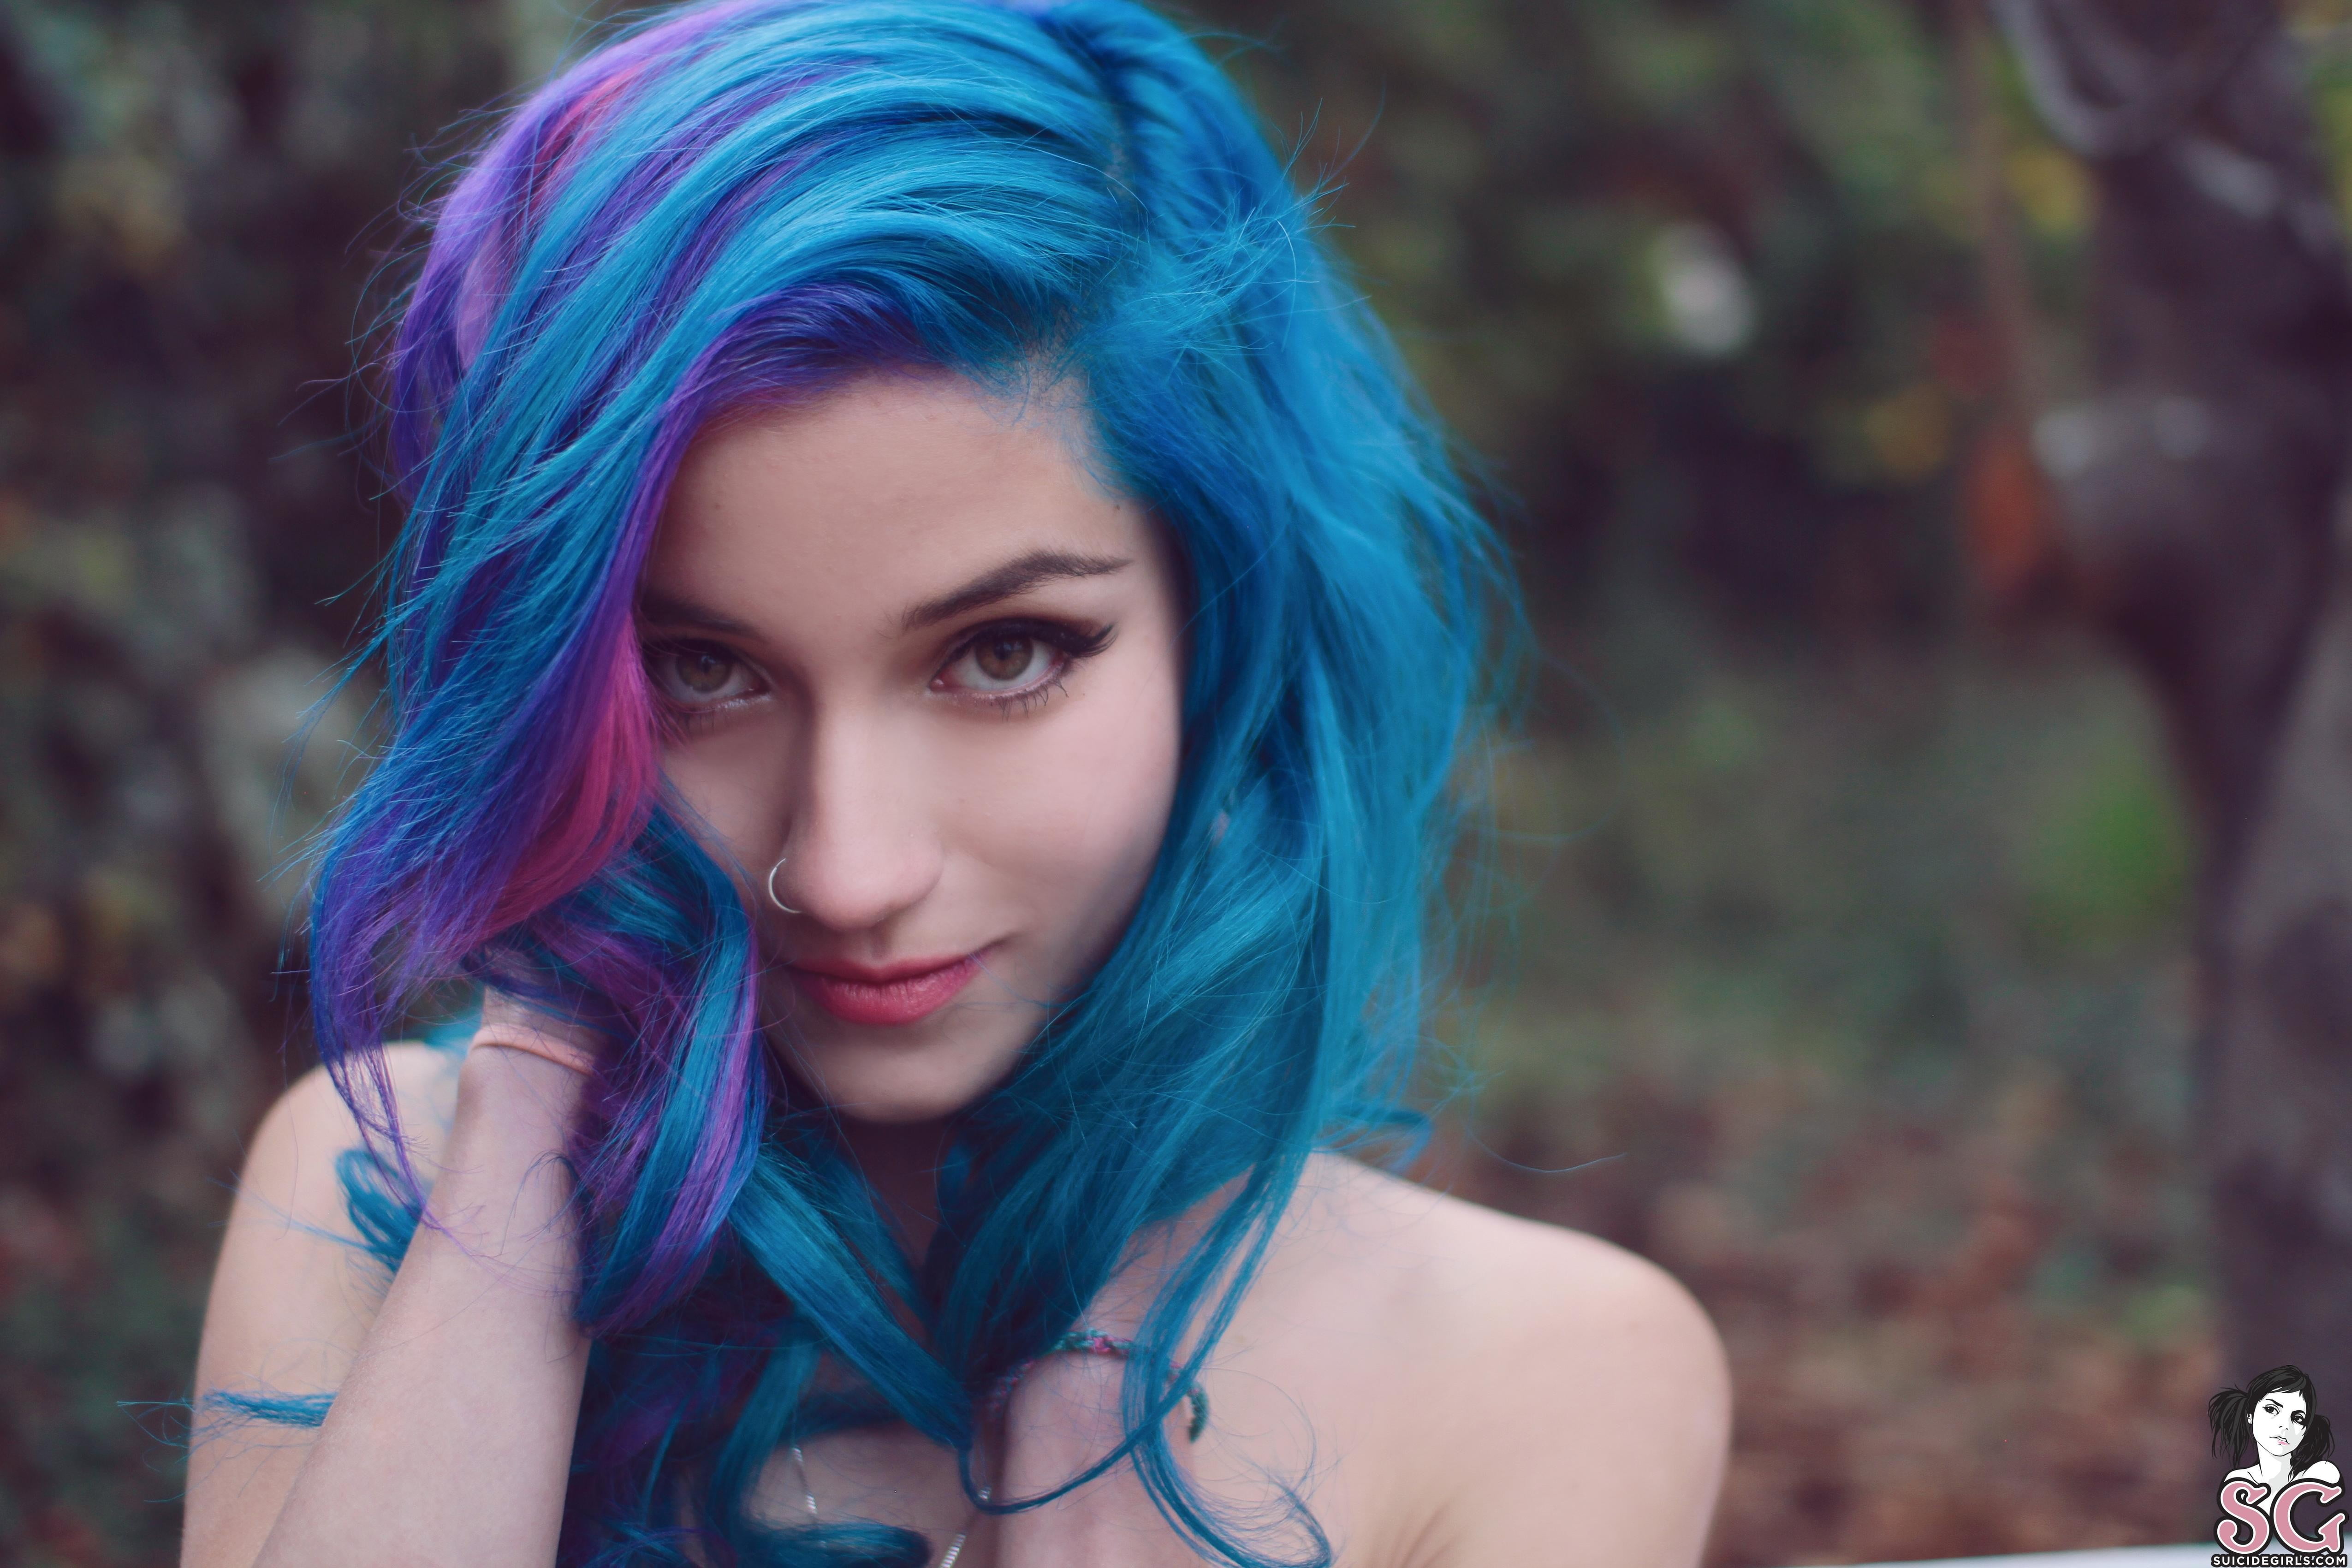 7. "Best Hair Products for Maintaining Pink and Blue Streaks" - wide 1